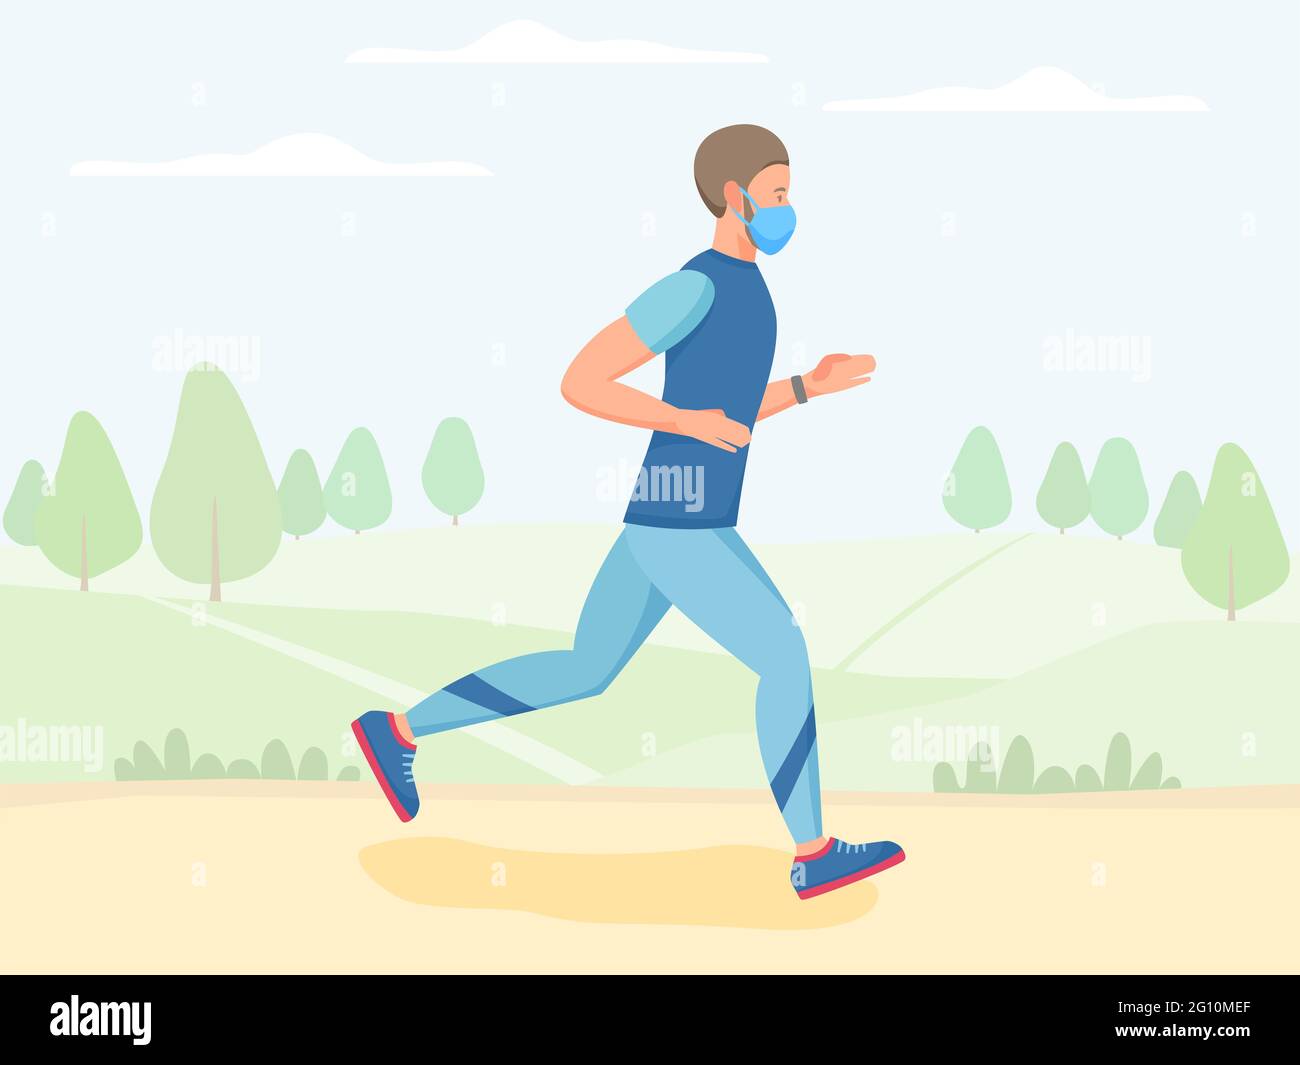 Men in mask running outdoor, jogging and training in park, physical activity outdoors, flat vector illustration Stock Vector